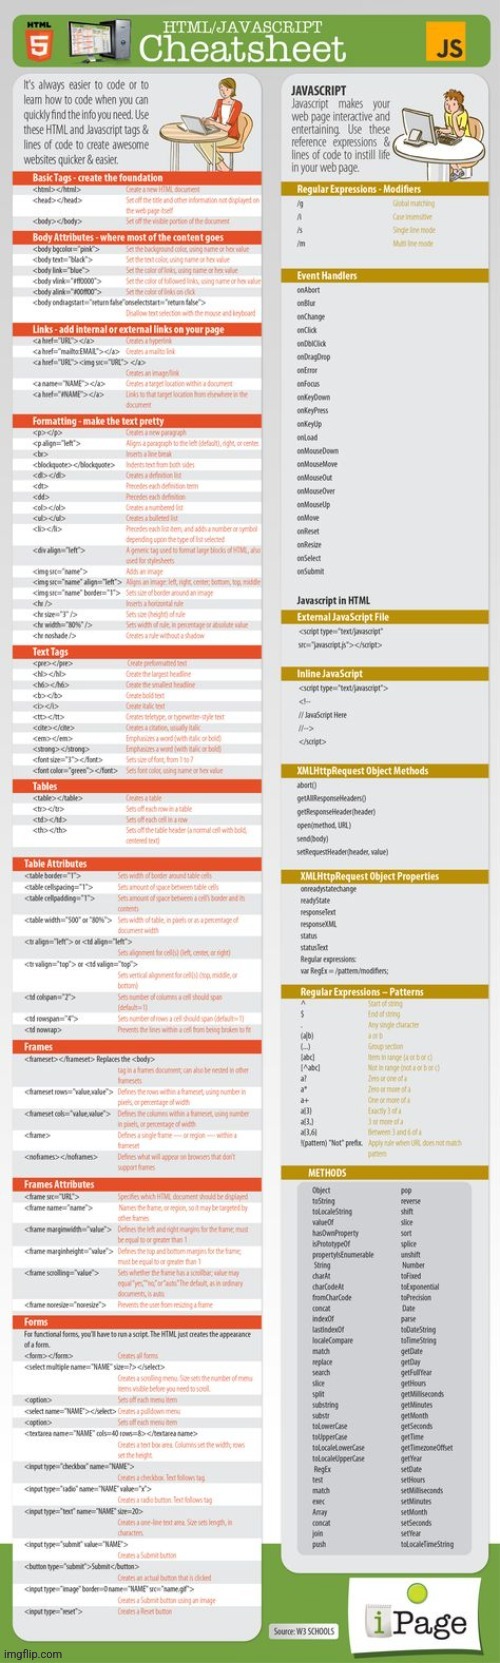 HTML / JavaScript Cheat-Sheet (Repost By SimoTheFinlandized - Not Mine) | image tagged in simothefinlandized,html,javascript,computer-programming,tutorial,repost | made w/ Imgflip meme maker